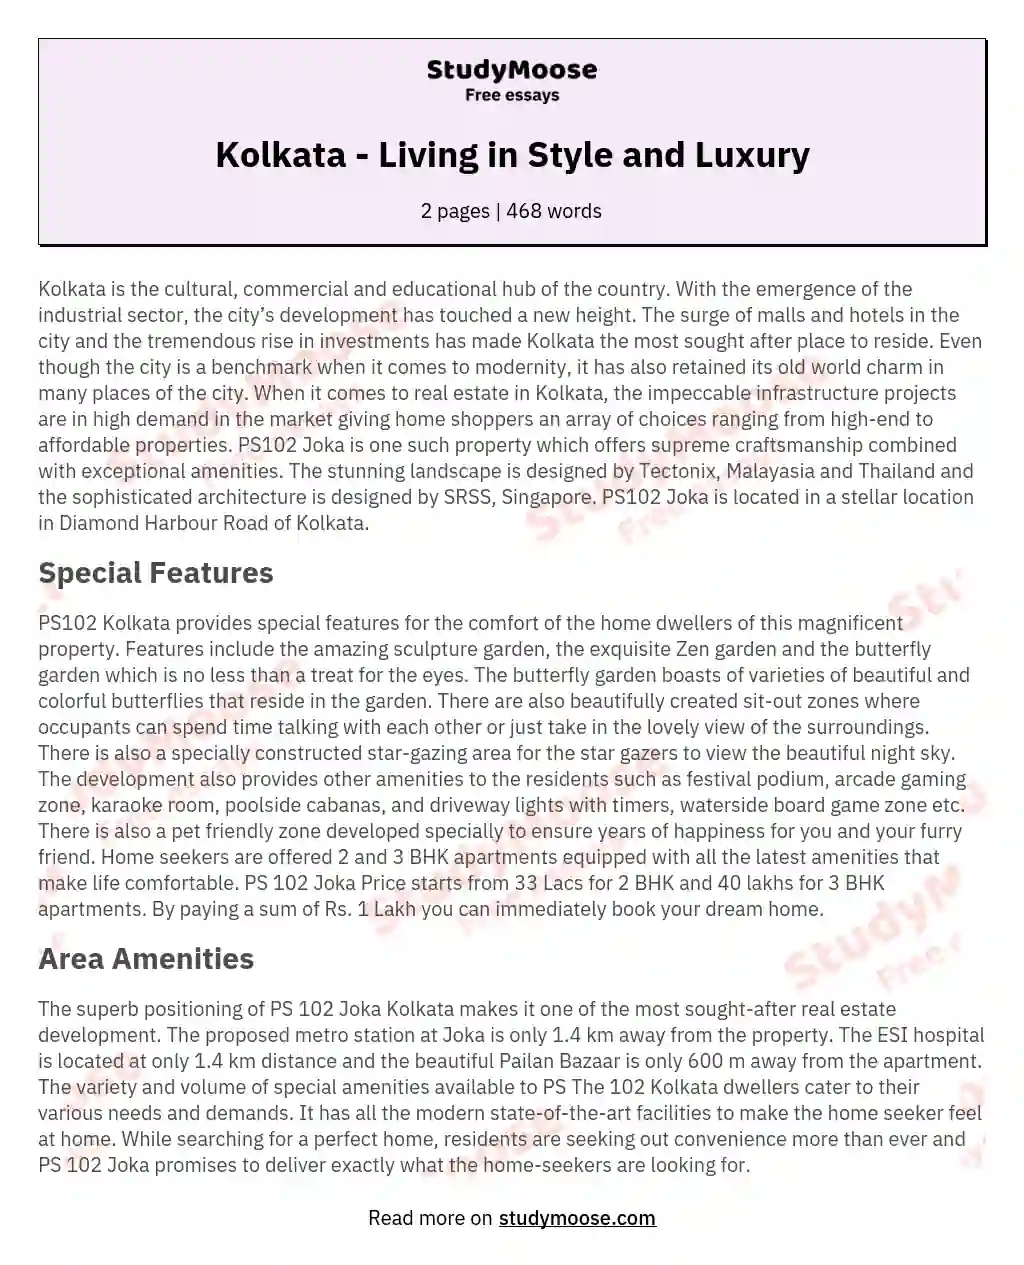 Kolkata - Living in Style and Luxury essay